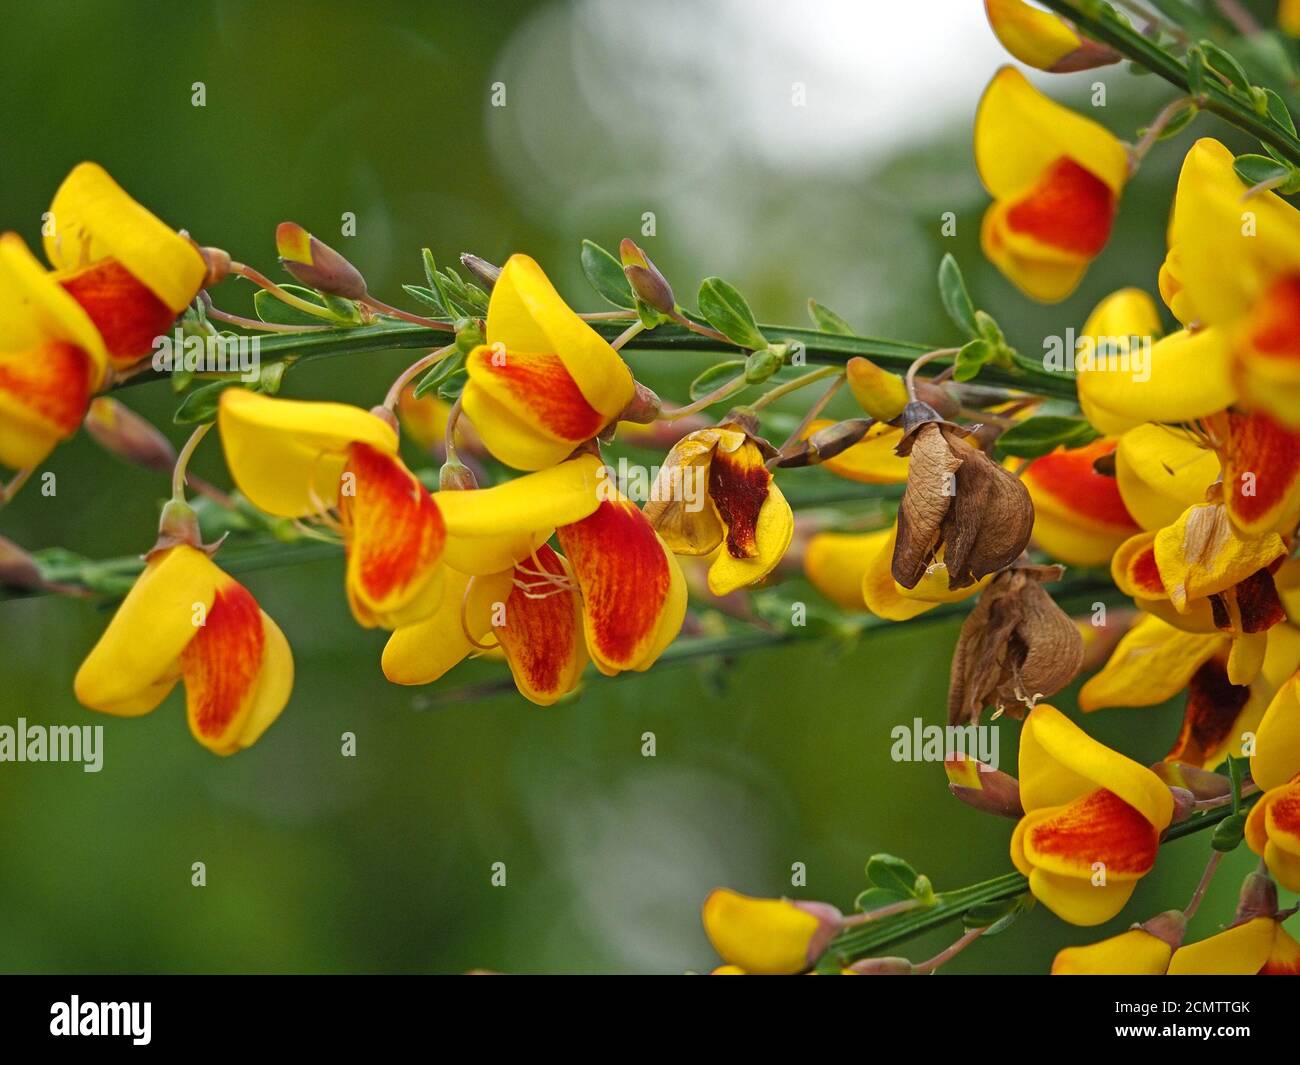 yellow & red flowers of ornamental variety of Scotch or Common Broom plant Cytisus scoparius in a garden Cumbria, England, UK Stock Photo